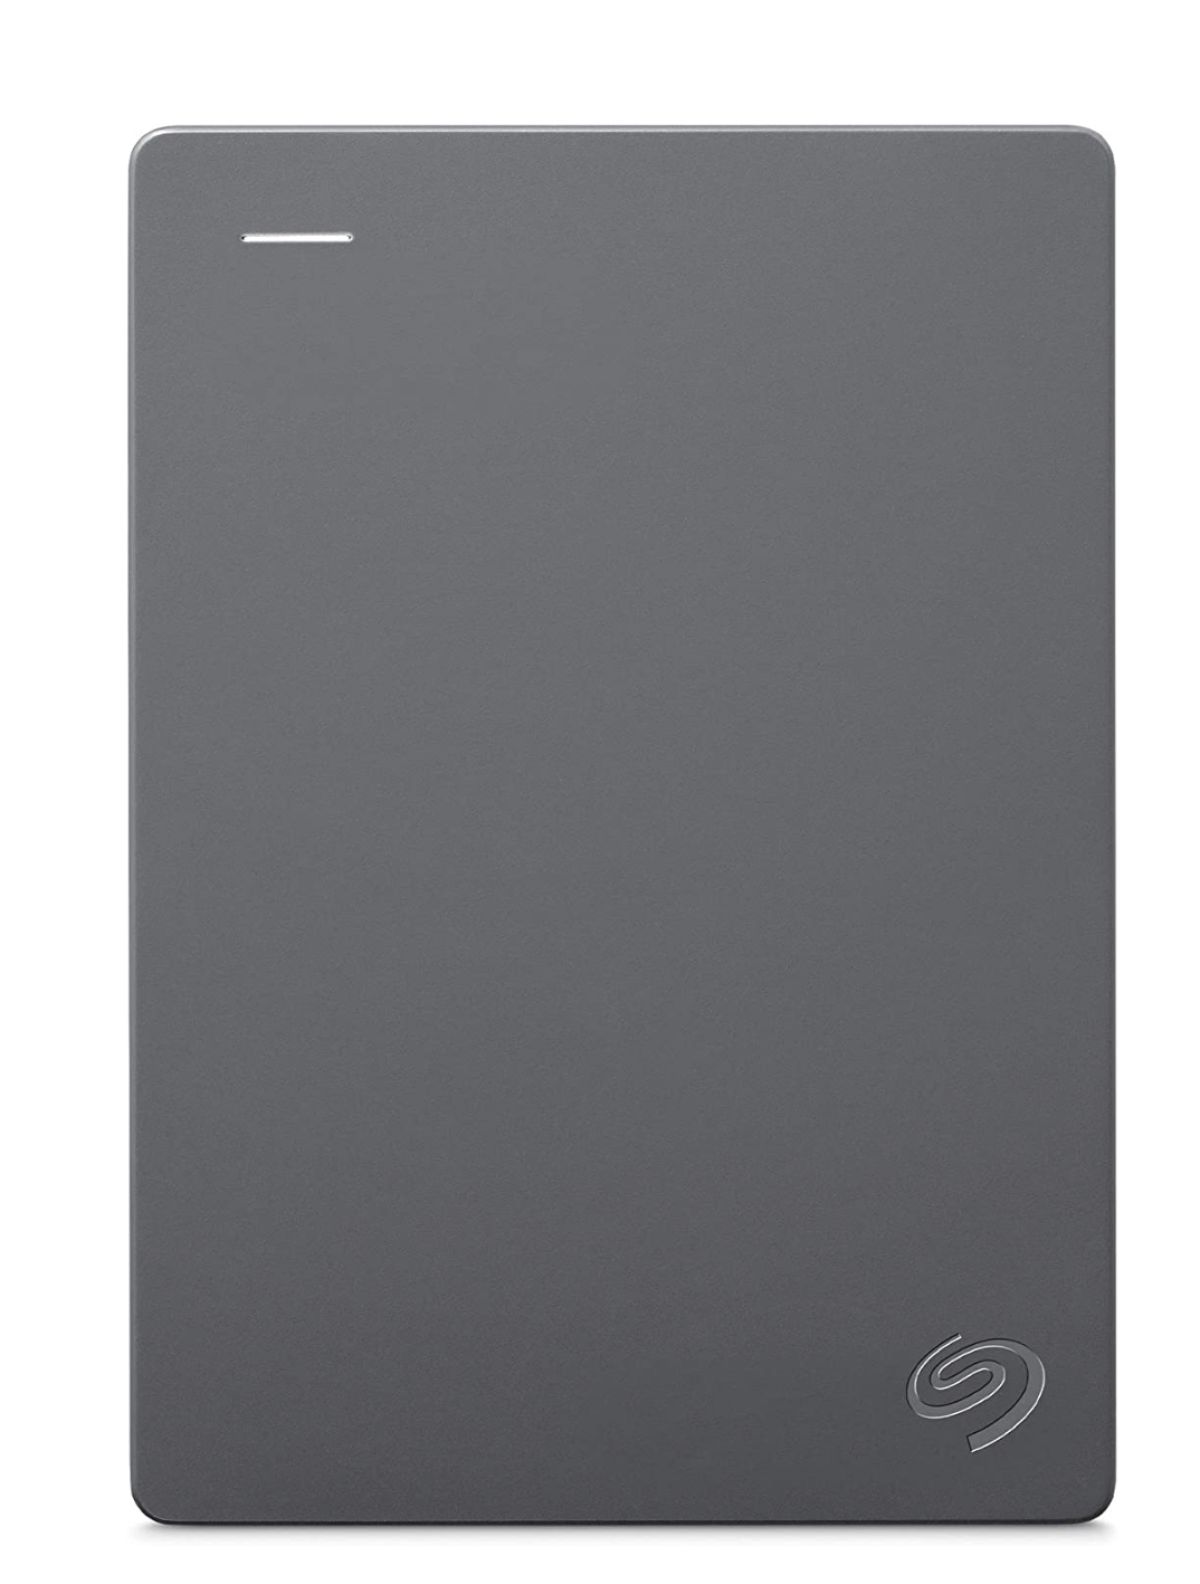 Seagate Basic Disque Dur Externe 2TO